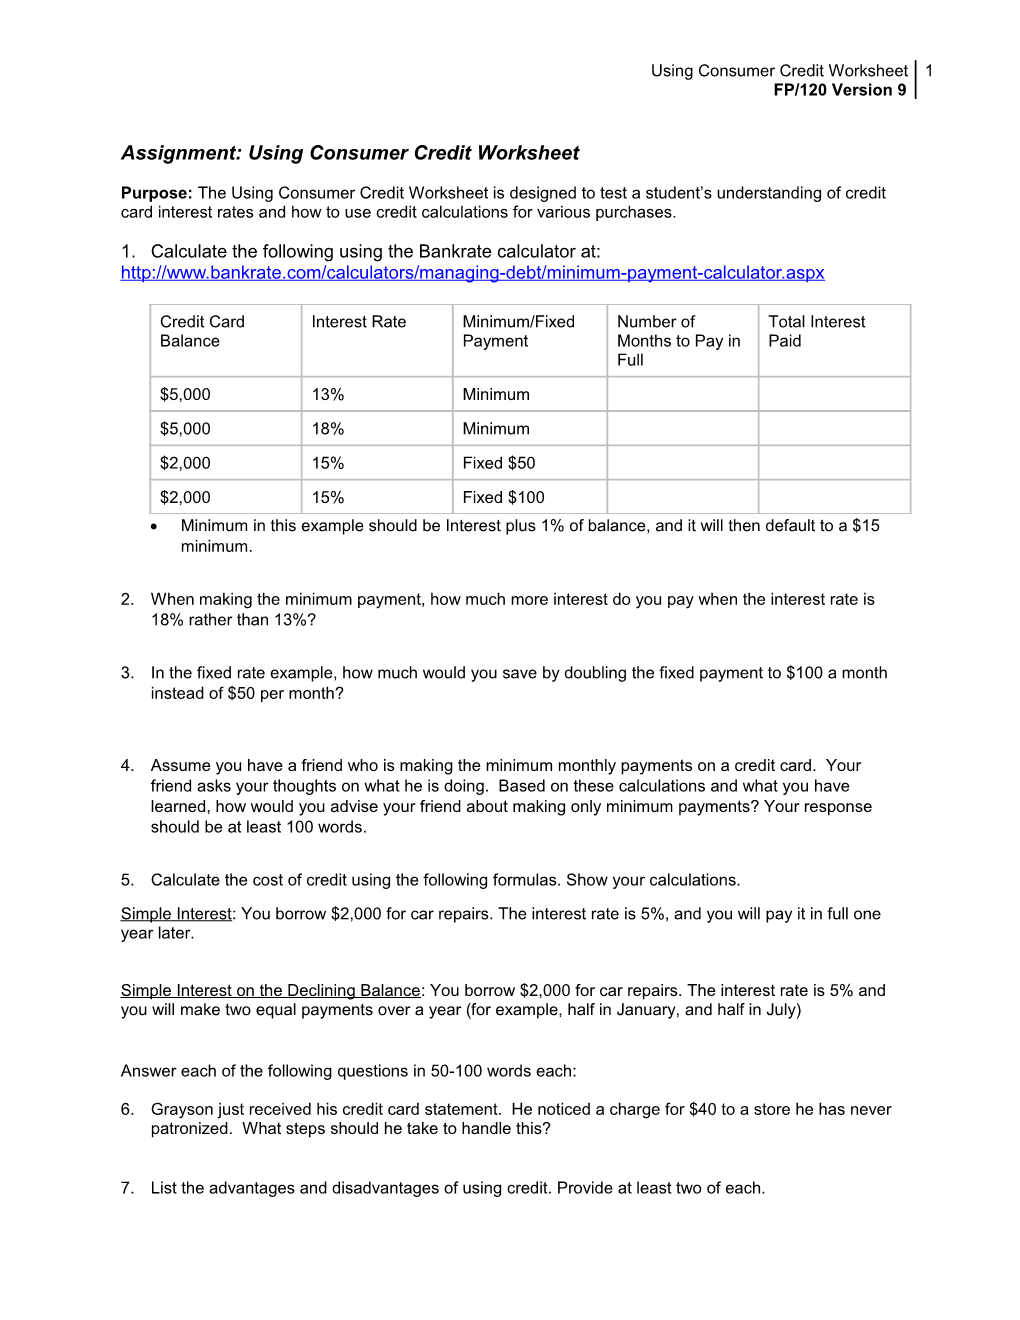 Assignment: Using Consumer Credit Worksheet